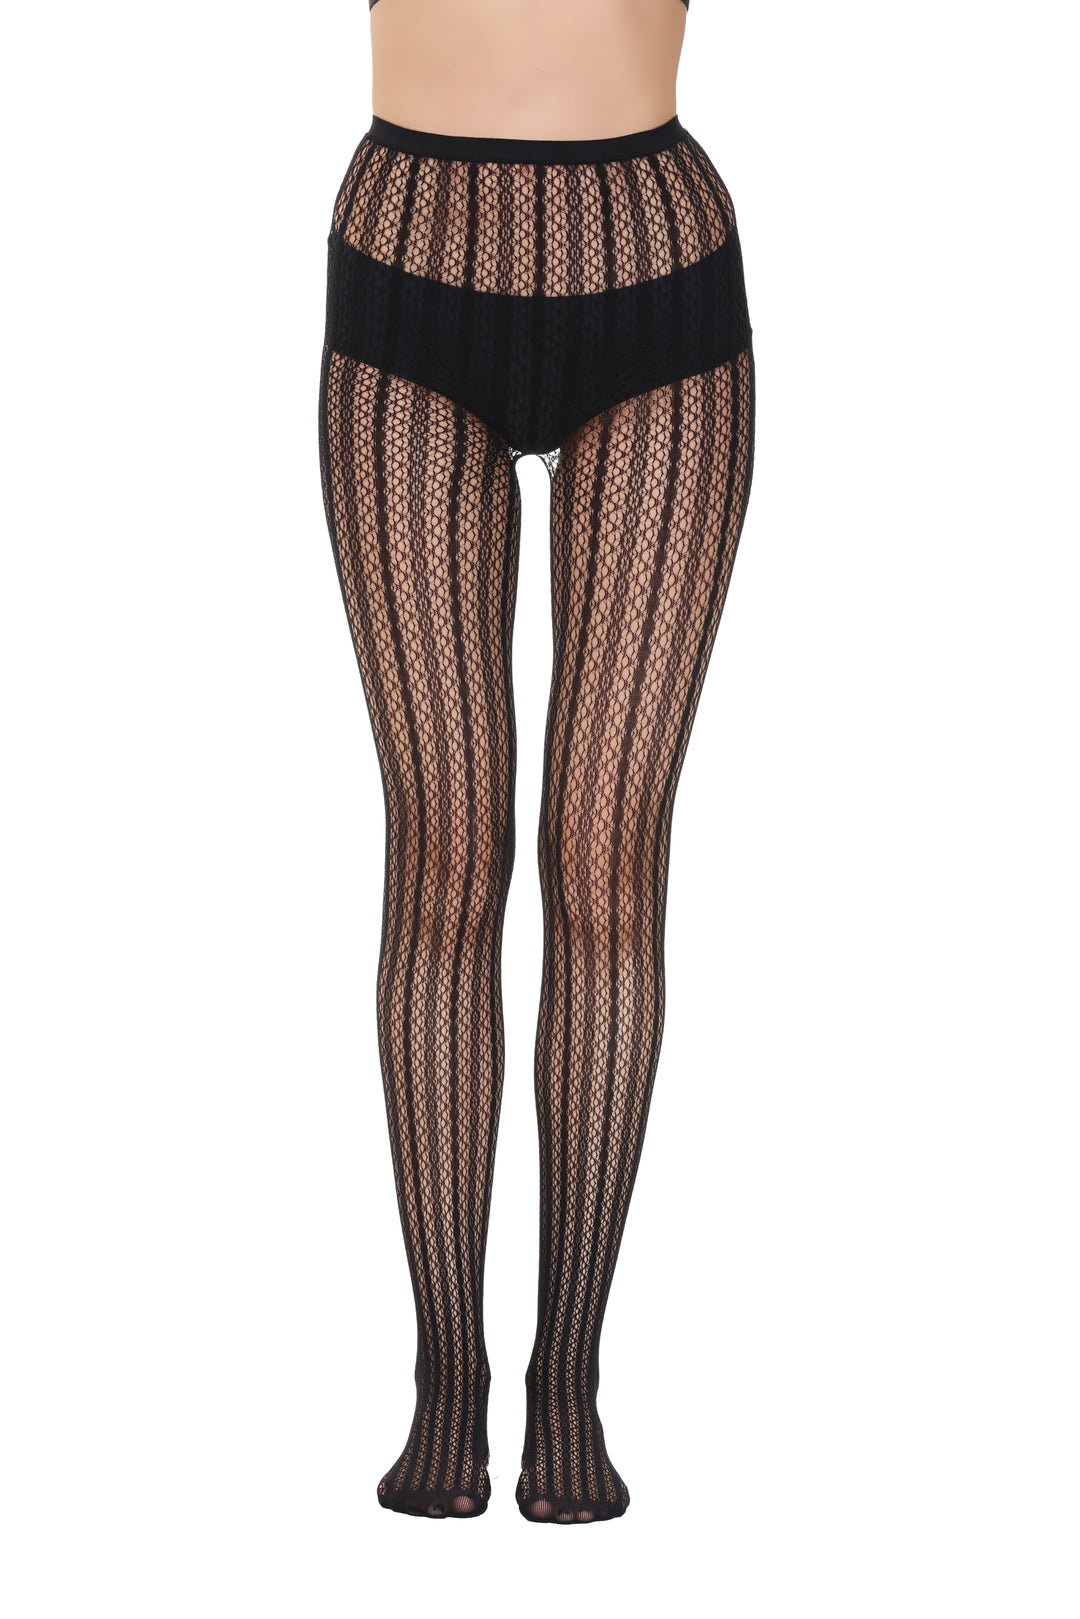 Fishnet Tights 111084 Front